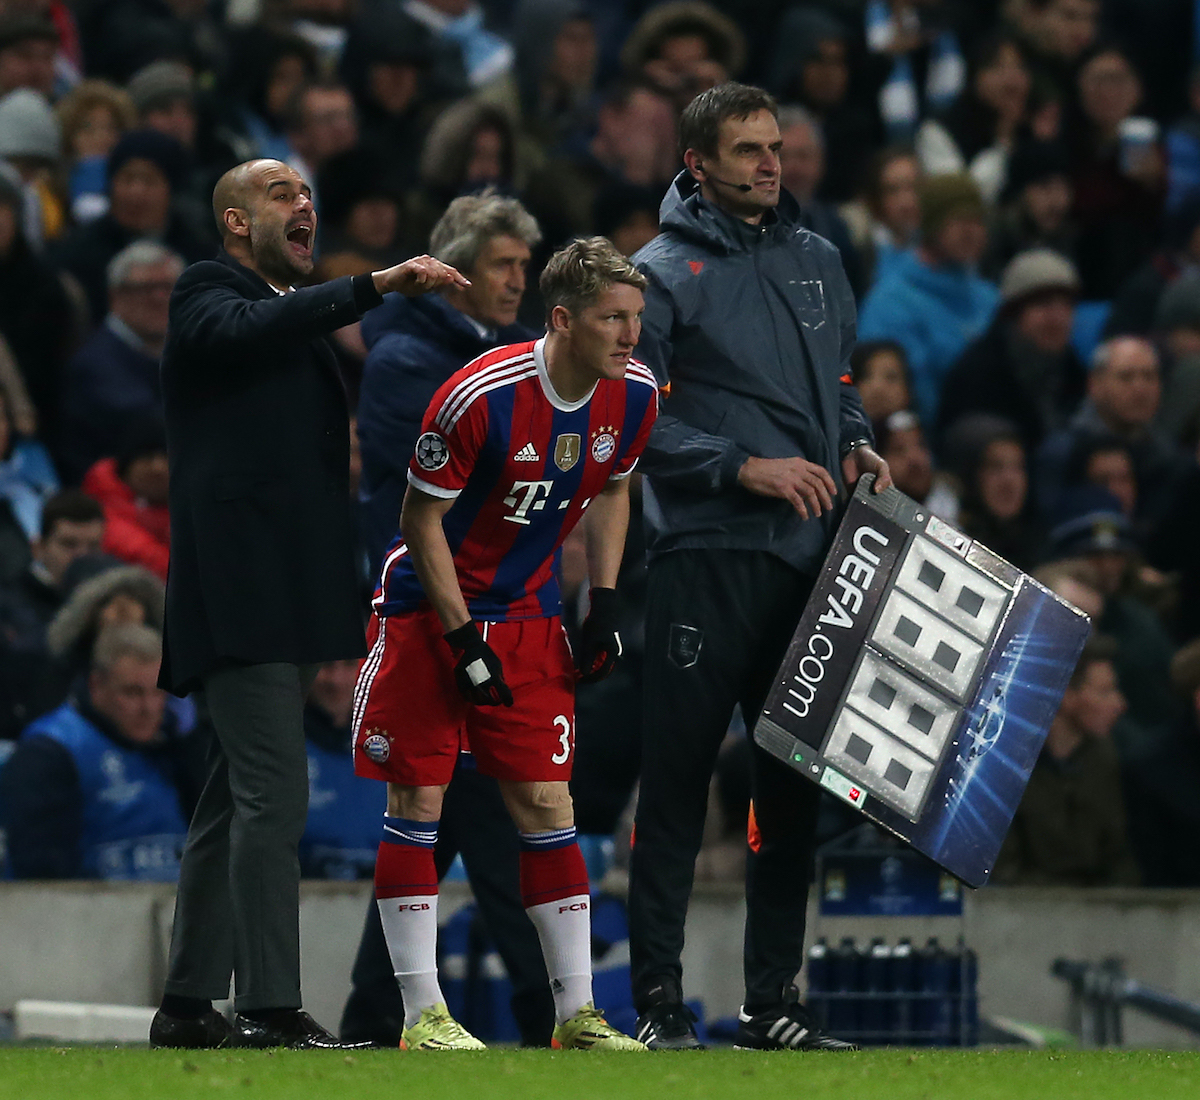 MANCHESTER, ENGLAND - Tuesday, November 25, 2014: Bayern Munich manager Pep Guardiola gestures from the touchline during the UEFA Champions League Group E match at the City of Manchester Stadium. (Pic by Chris Brunskill/Propaganda)